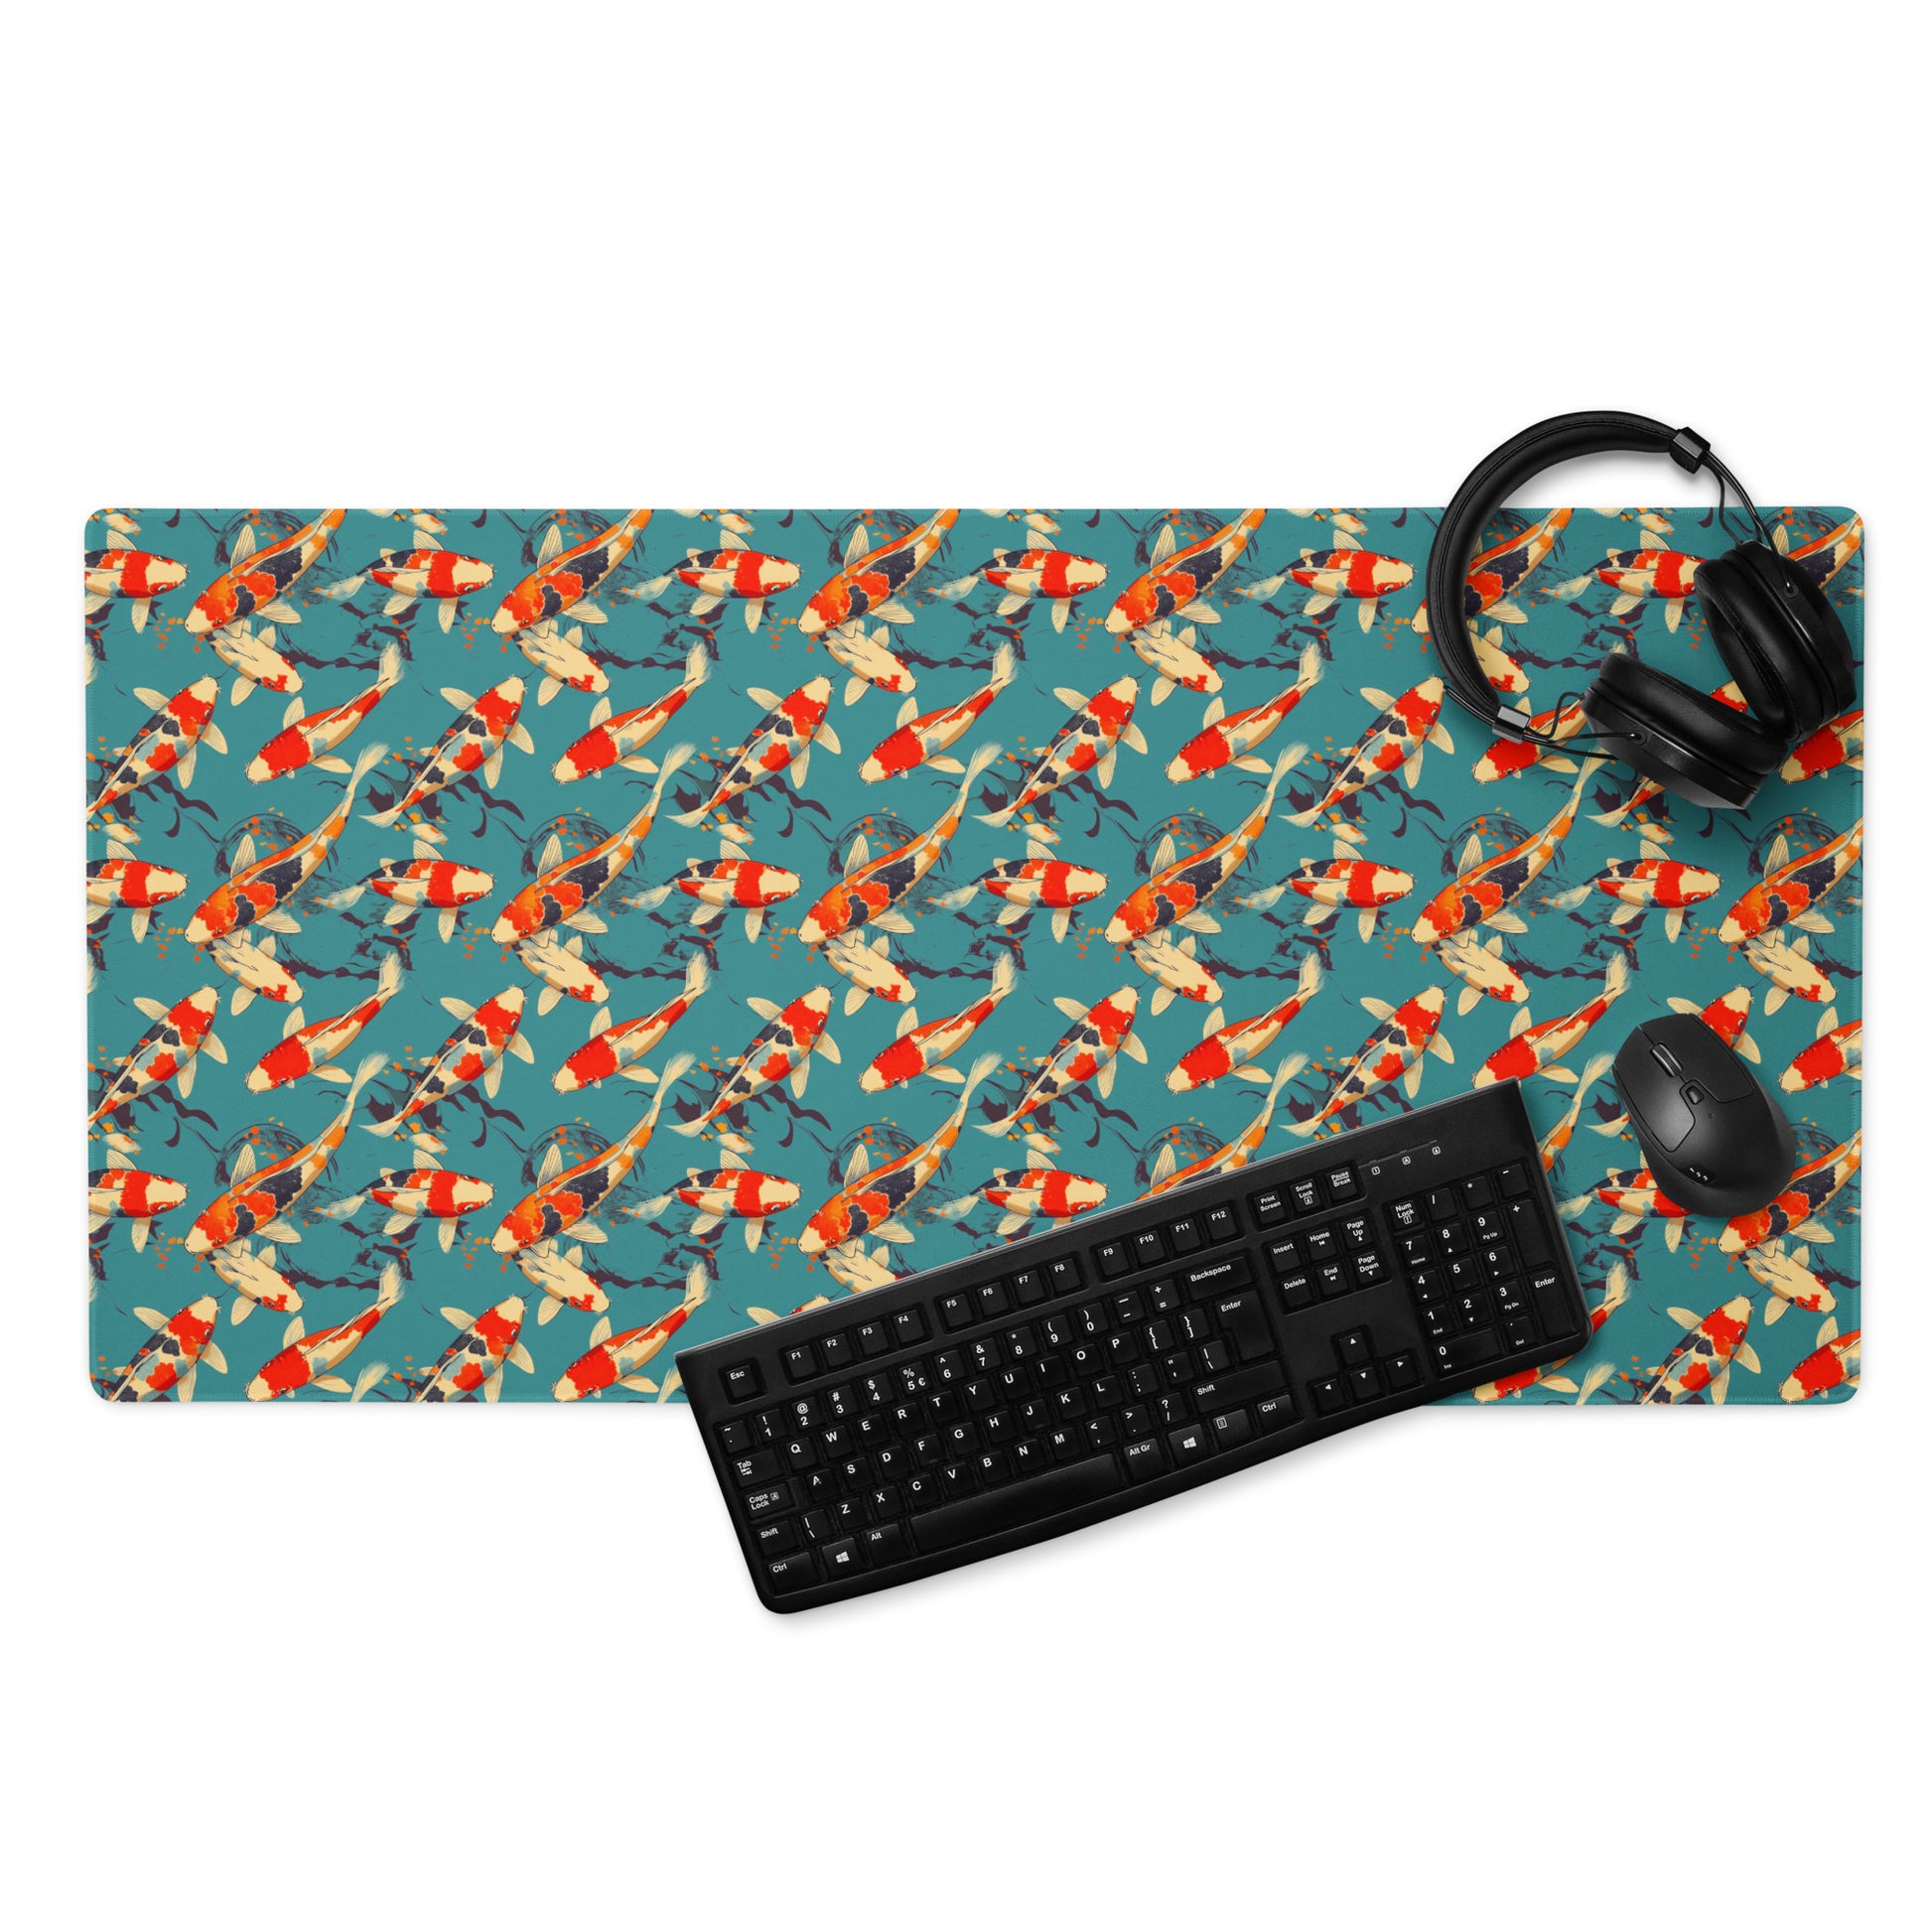 A 36" x 18" gaming desk pad with red koi fish on a blue background. A keyboard, headphones, and mouse sit on top of it.